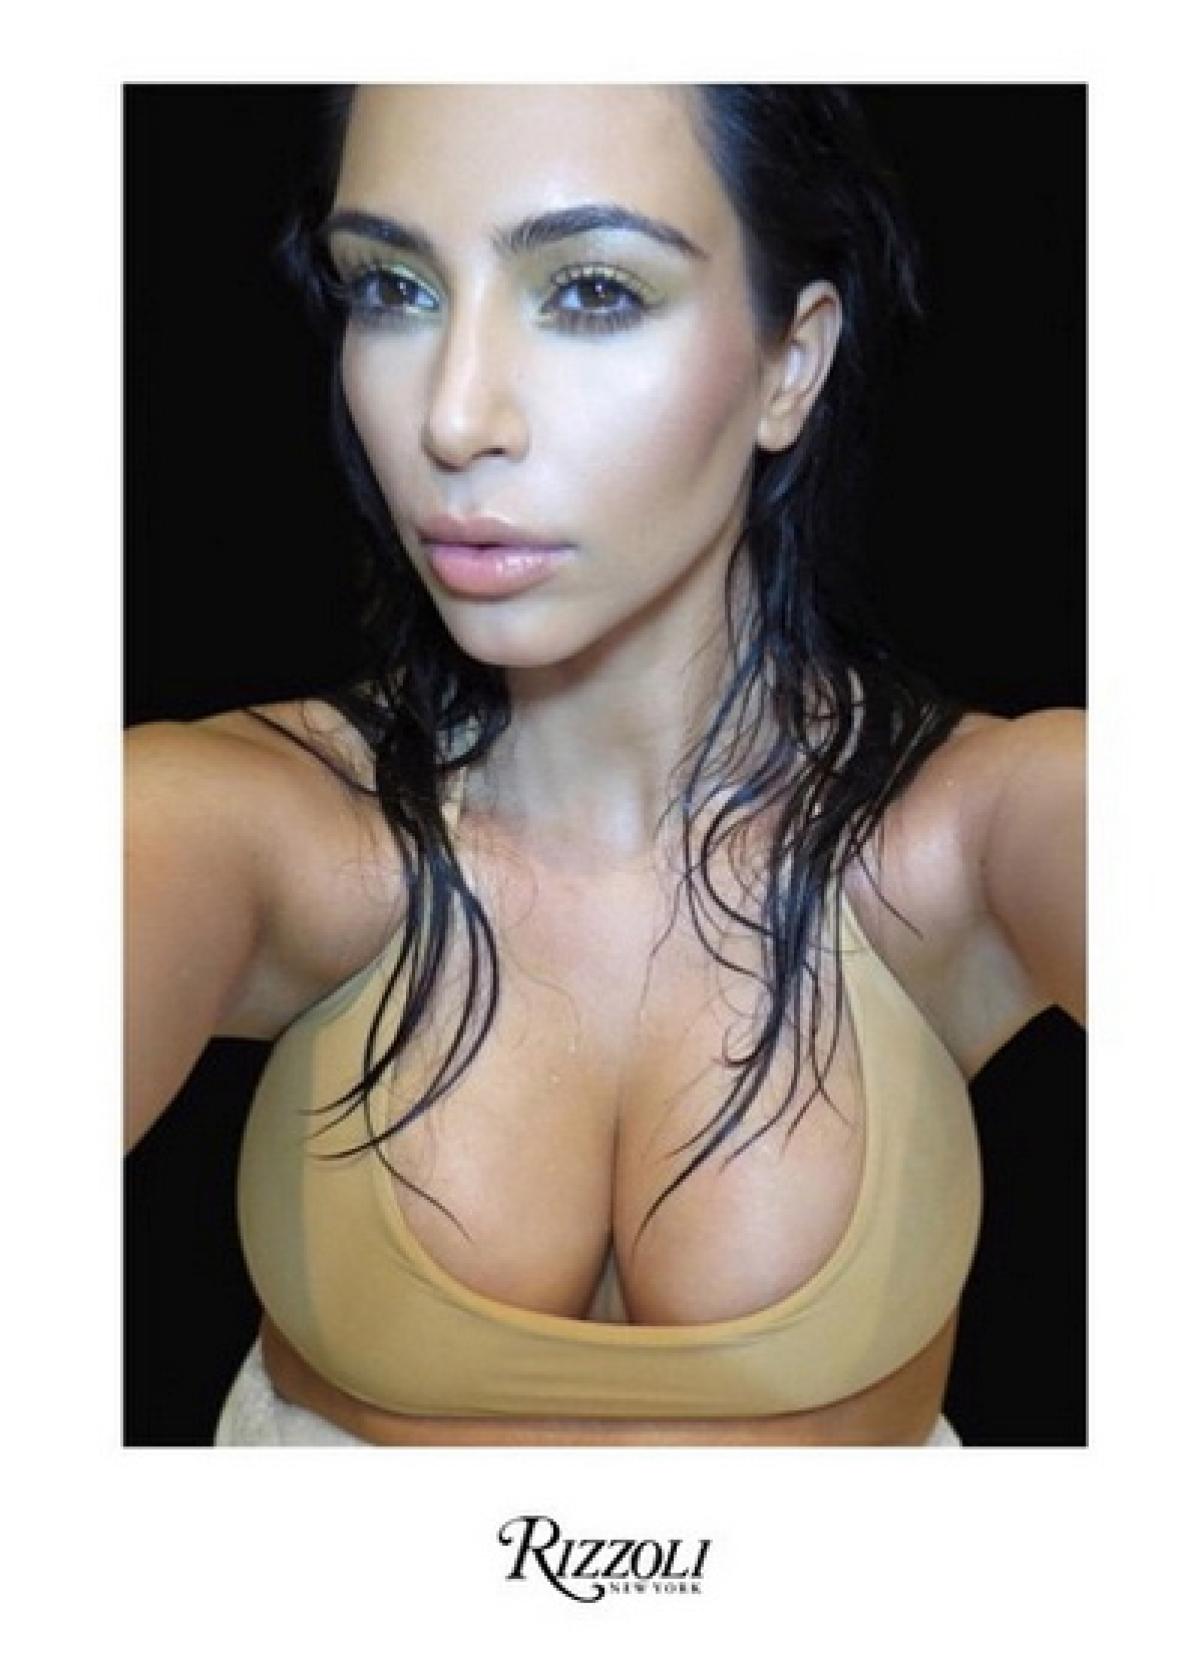 http://assets.nydailynews.com/polopoly_fs/1.2085200.1421777973!/img/httpImage/image.jpg_gen/derivatives/gallery_1200/kim-kardashian-shares-cover-new-book-selfish.jpg